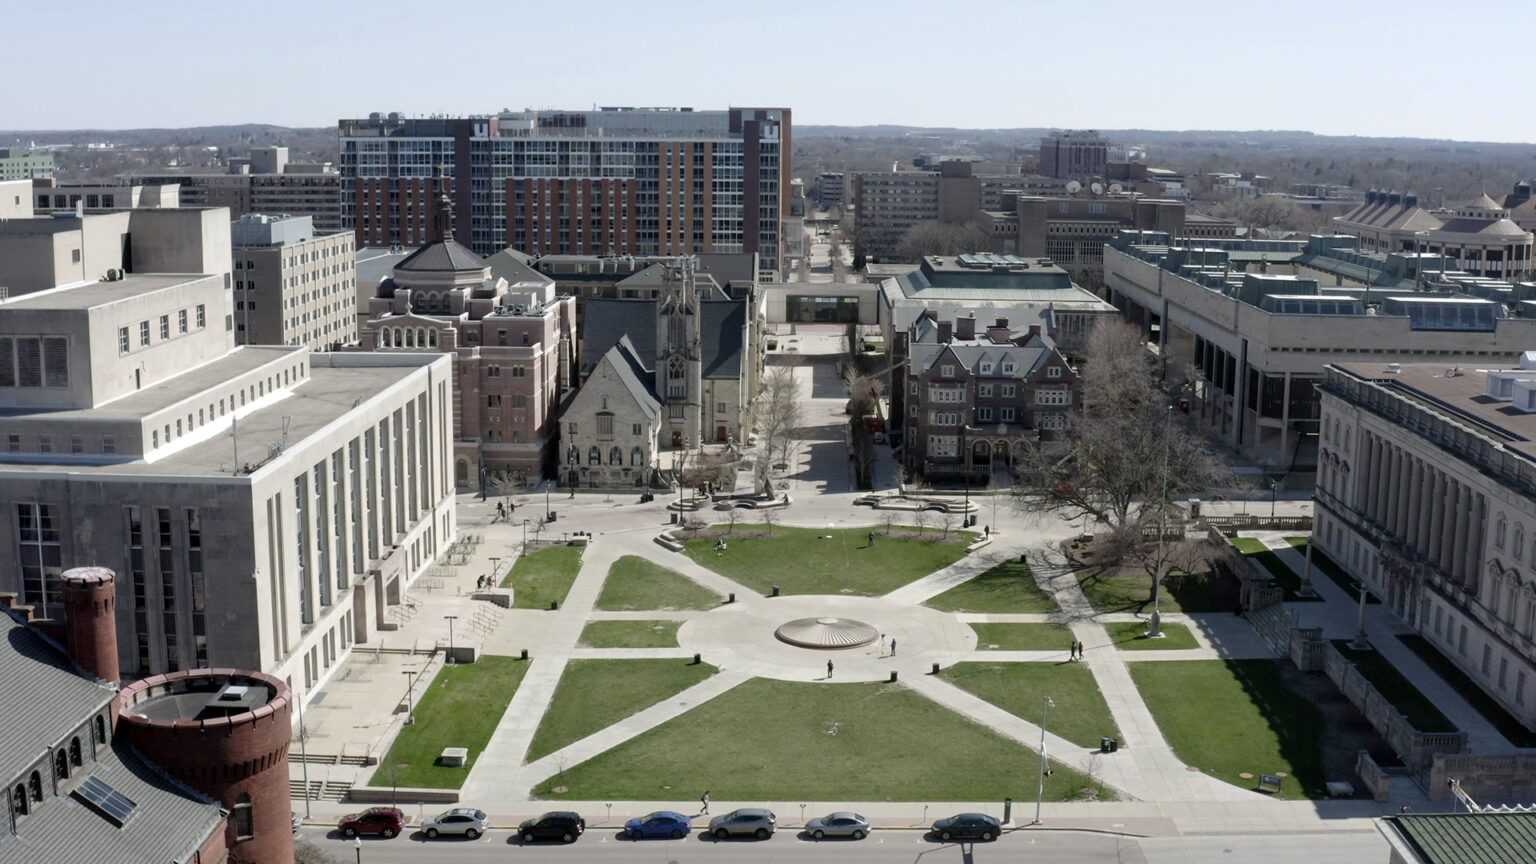 An aerial photo shows a plaza with sections of grass and concrete walkways surrounded by buildings of different sizes on three sides, with another walkway extending from its center toward the horizon between more buildings and trees.